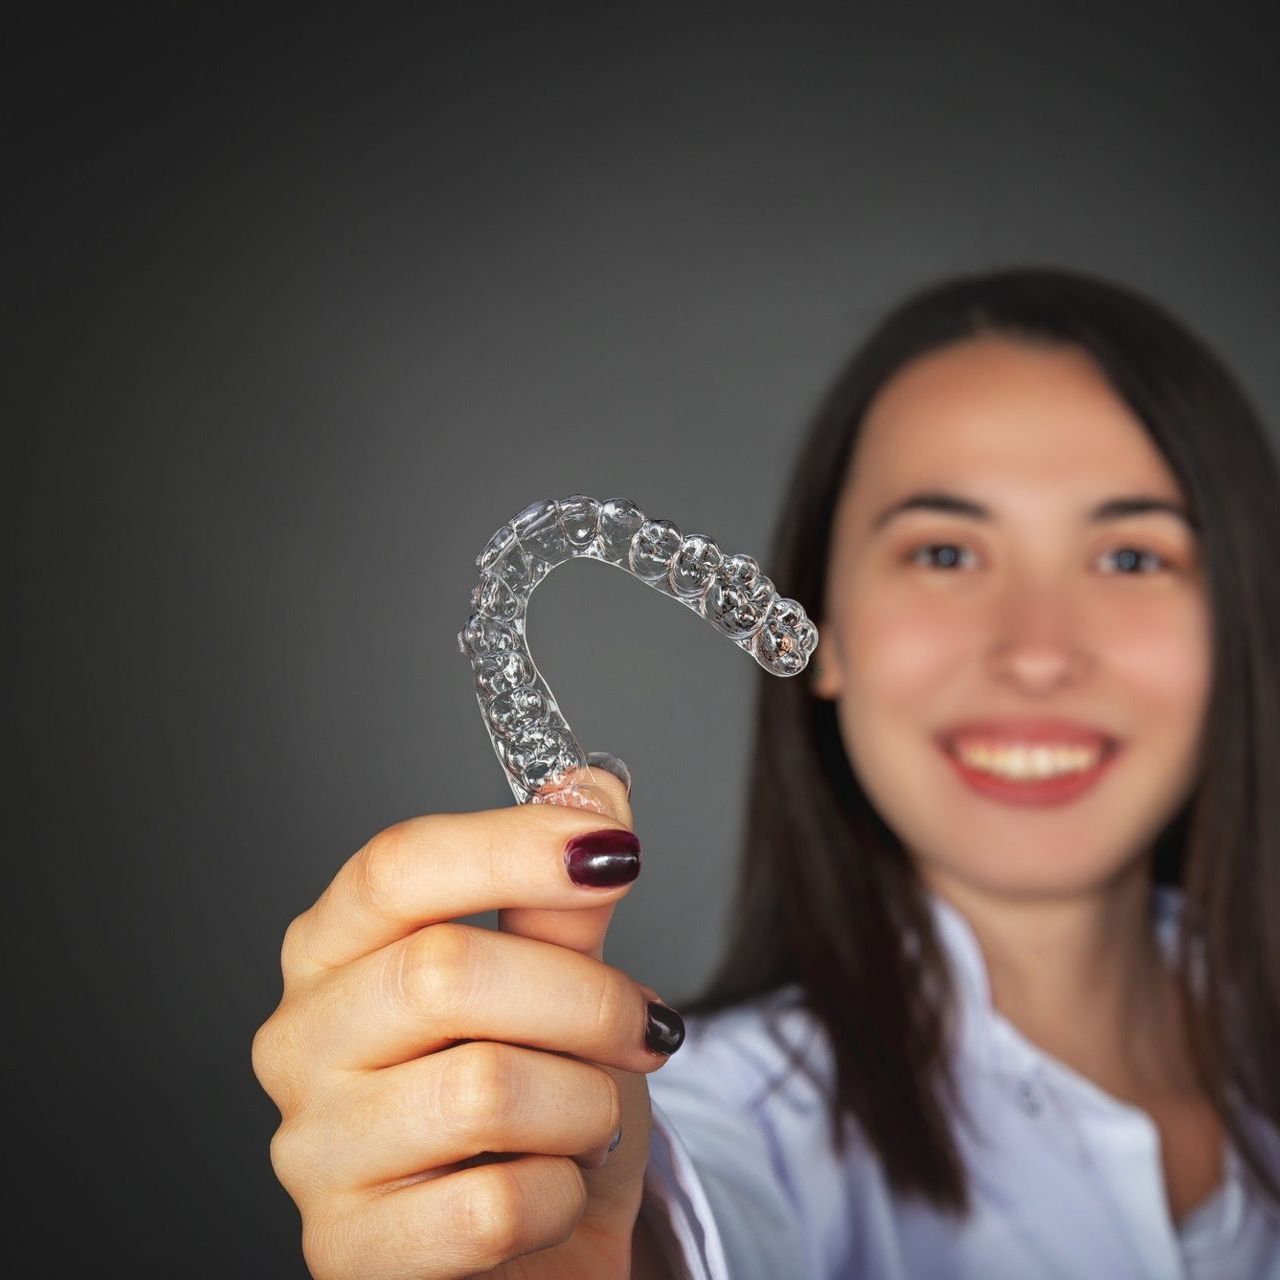 woman holding a clear aligner in front of her face